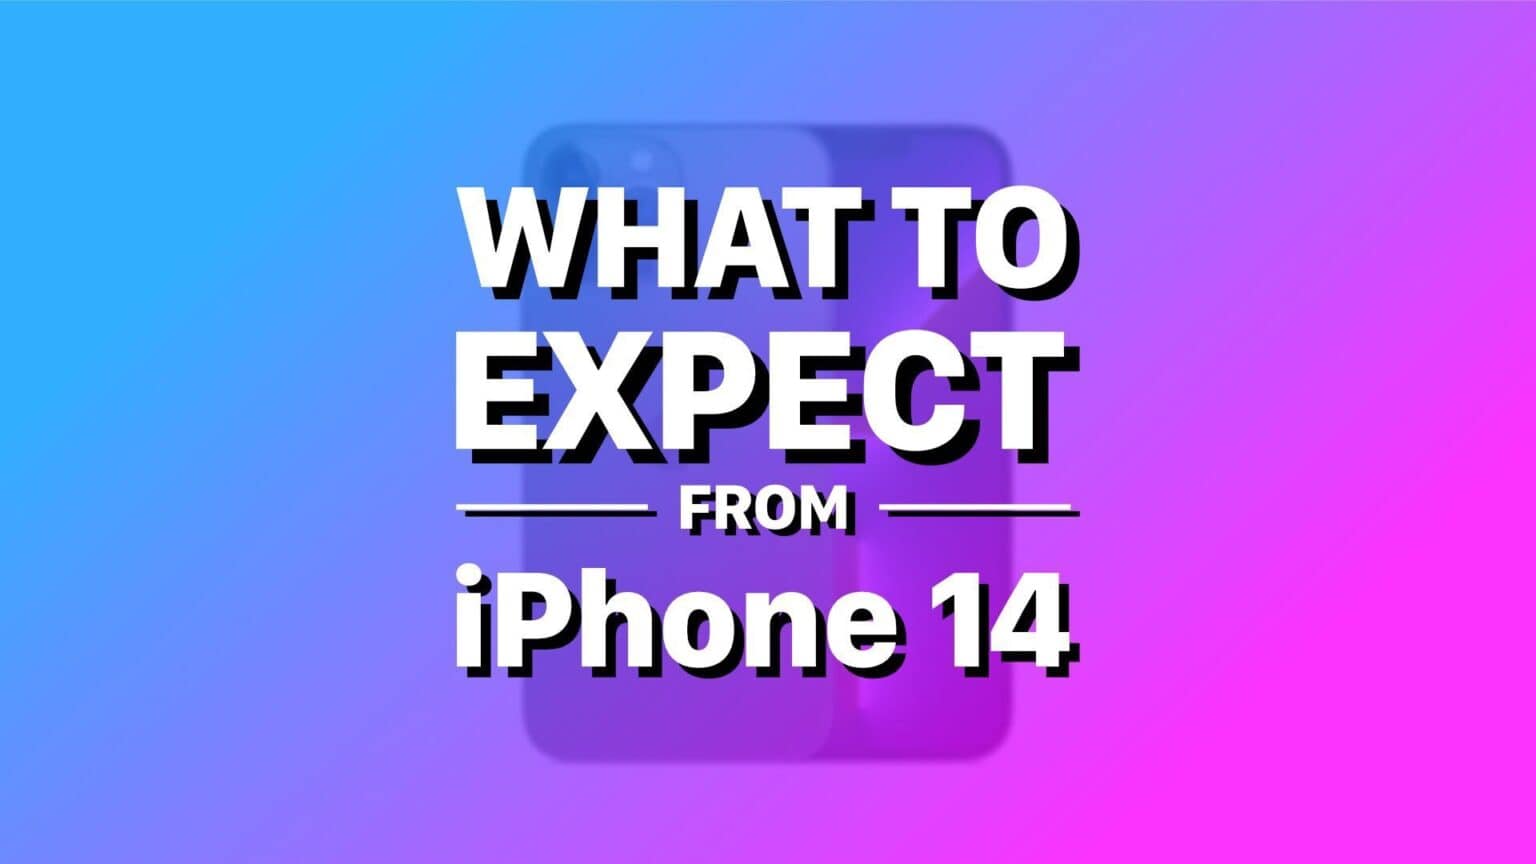 What to expect from iPhone 14 in 2022